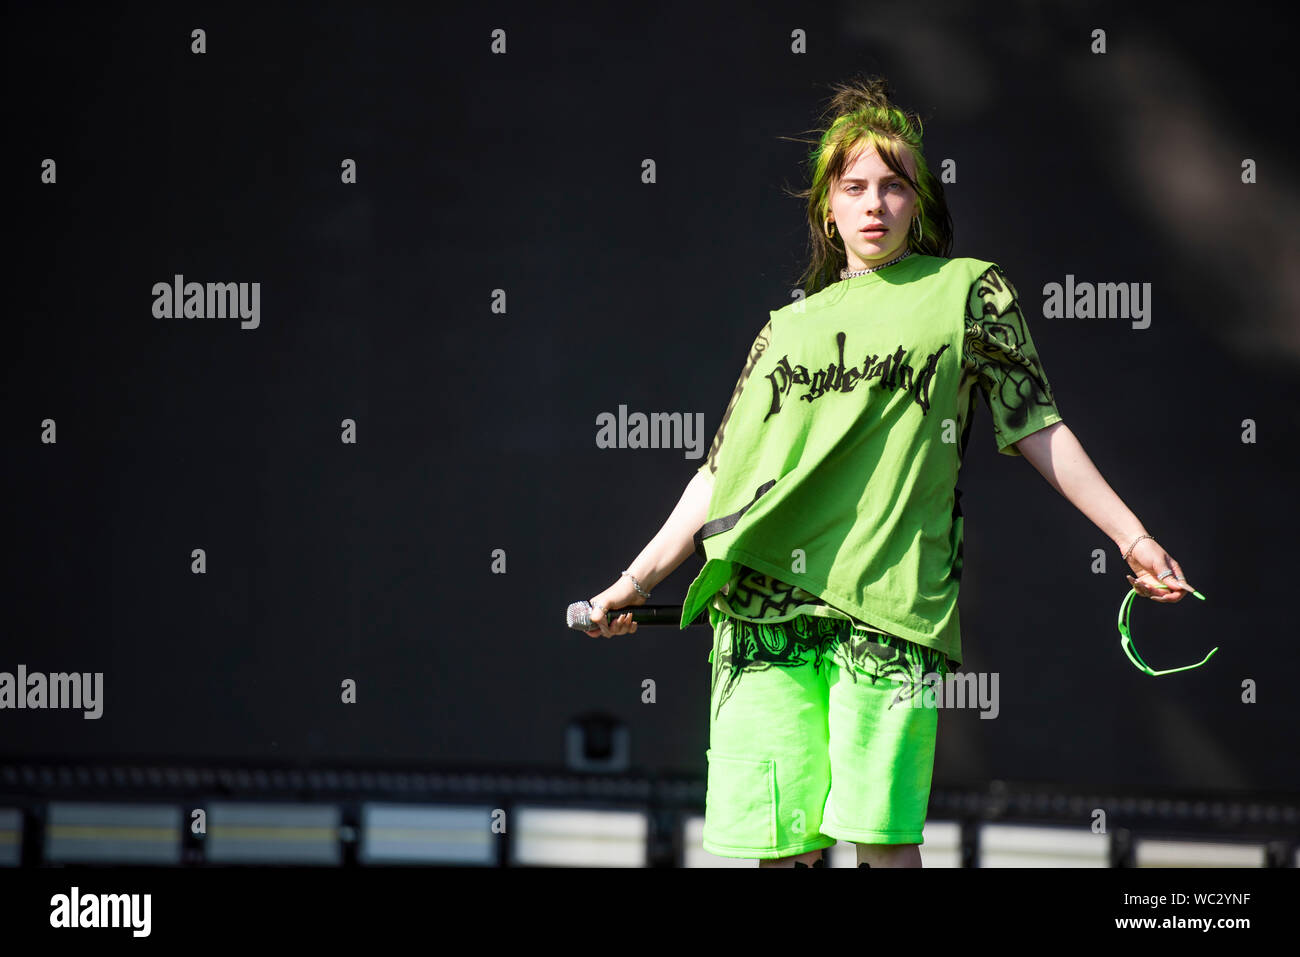 Leeds, UK. 25th August 2019. Billie Eilish born Billie Eilish Pirate Baird O'Connell performs on the main stage at Leeds Festival 2019, 2019-08-25 Stock Photo